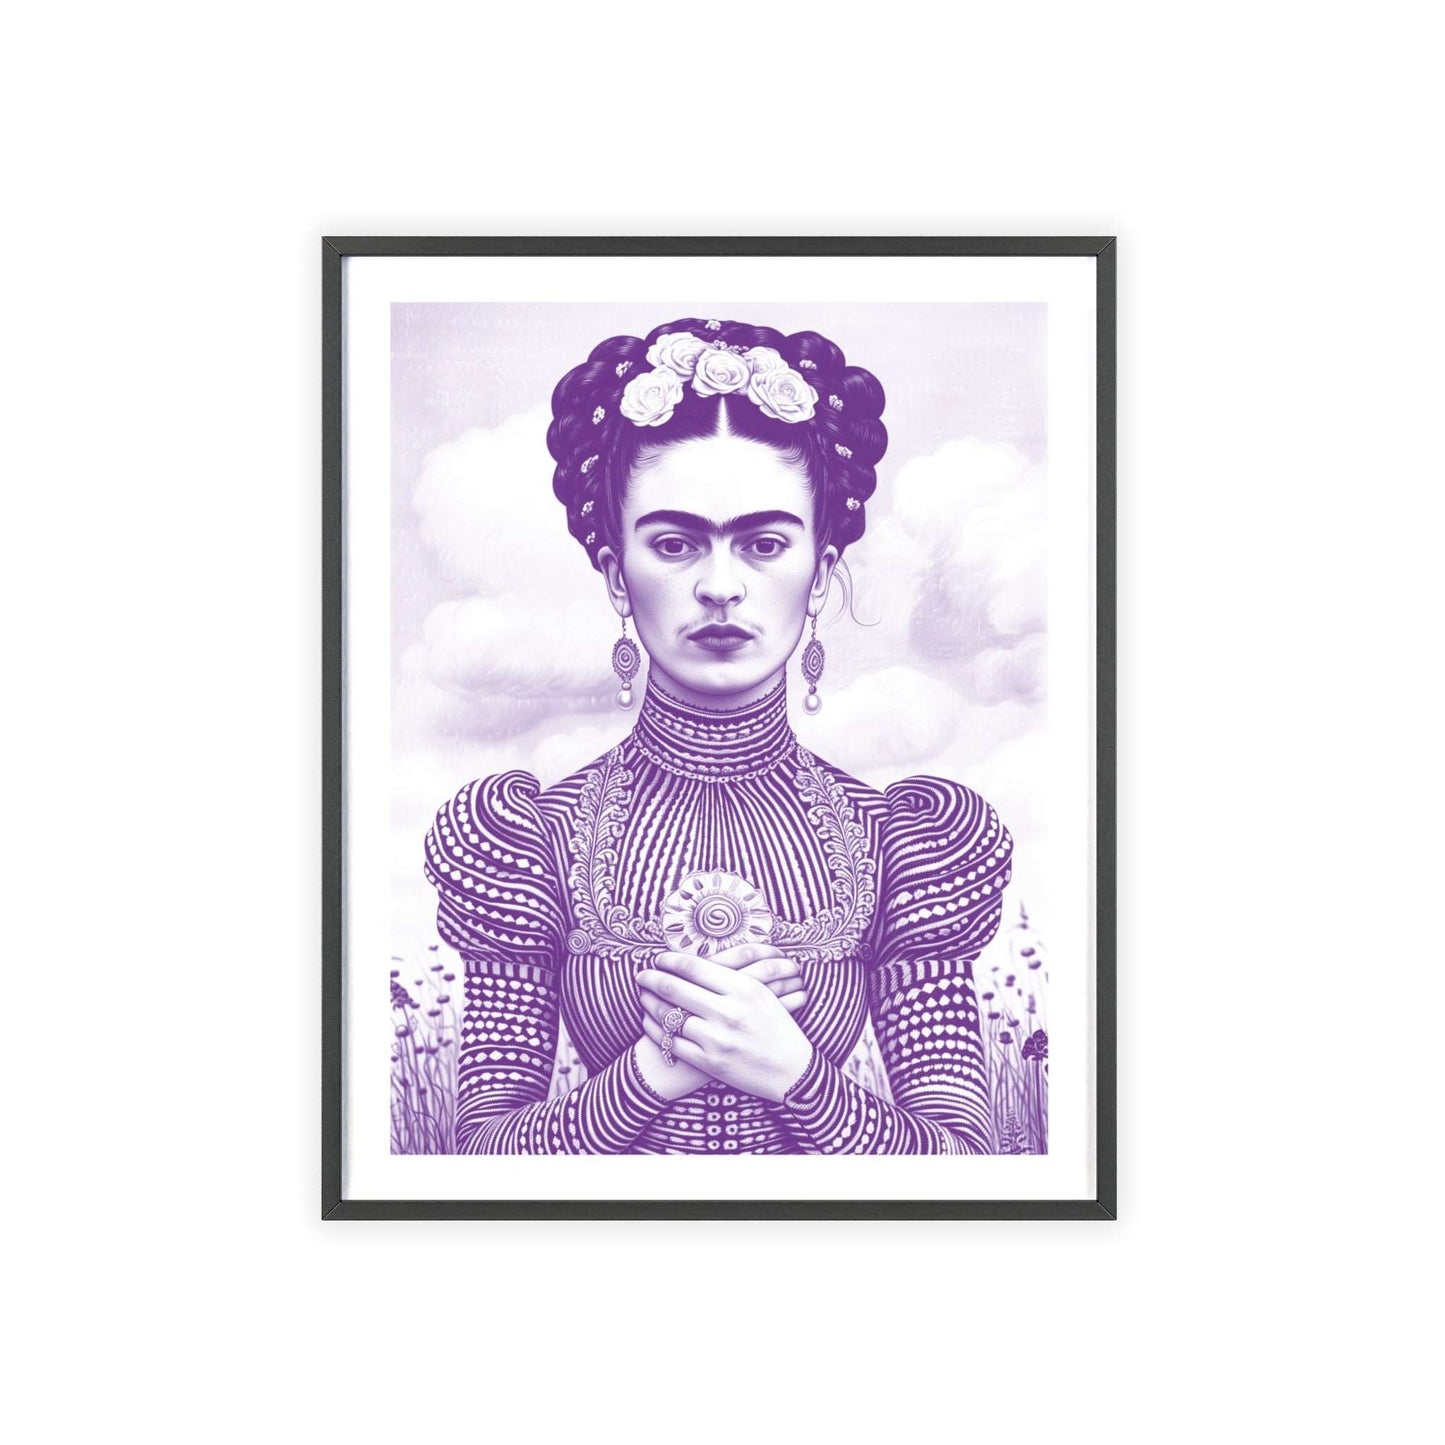 Must-Have Frida Portrait! Modern wall art in vibrant violet. Add a touch of elegance to your home decor. Shop now!